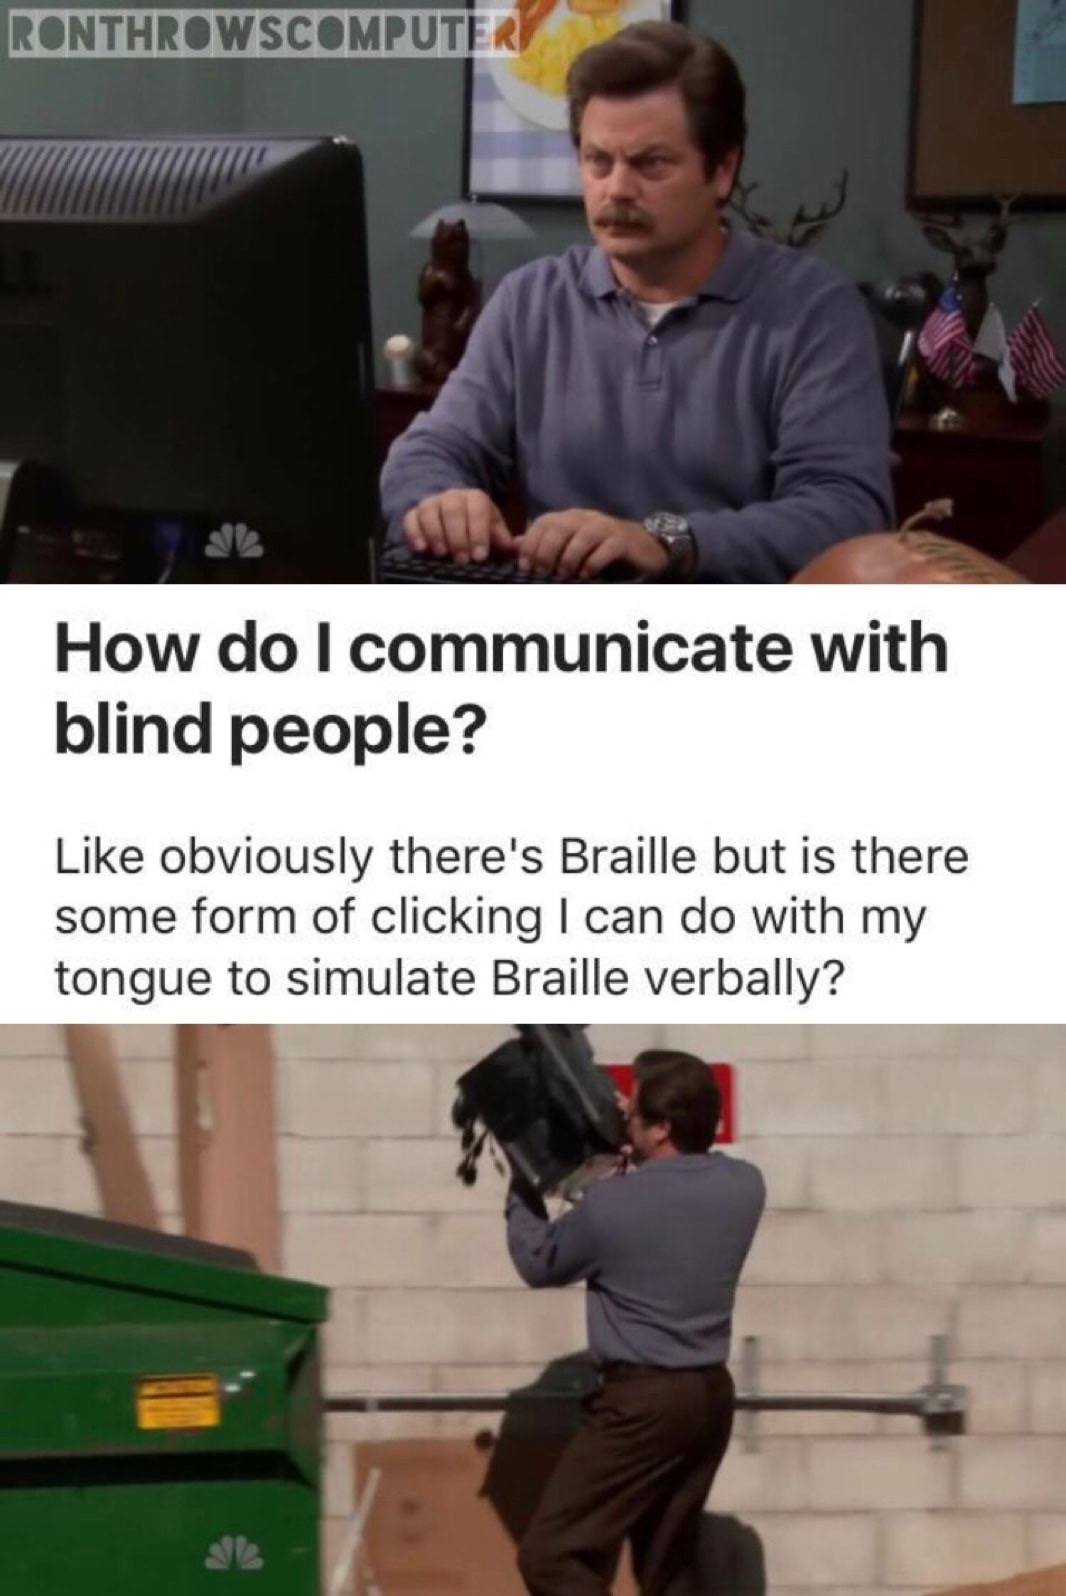 feminist cringe - Ronthrowscomputer How do I communicate with blind people? obviously there's Braille but is there some form of clicking I can do with my tongue to simulate Braille verbally?